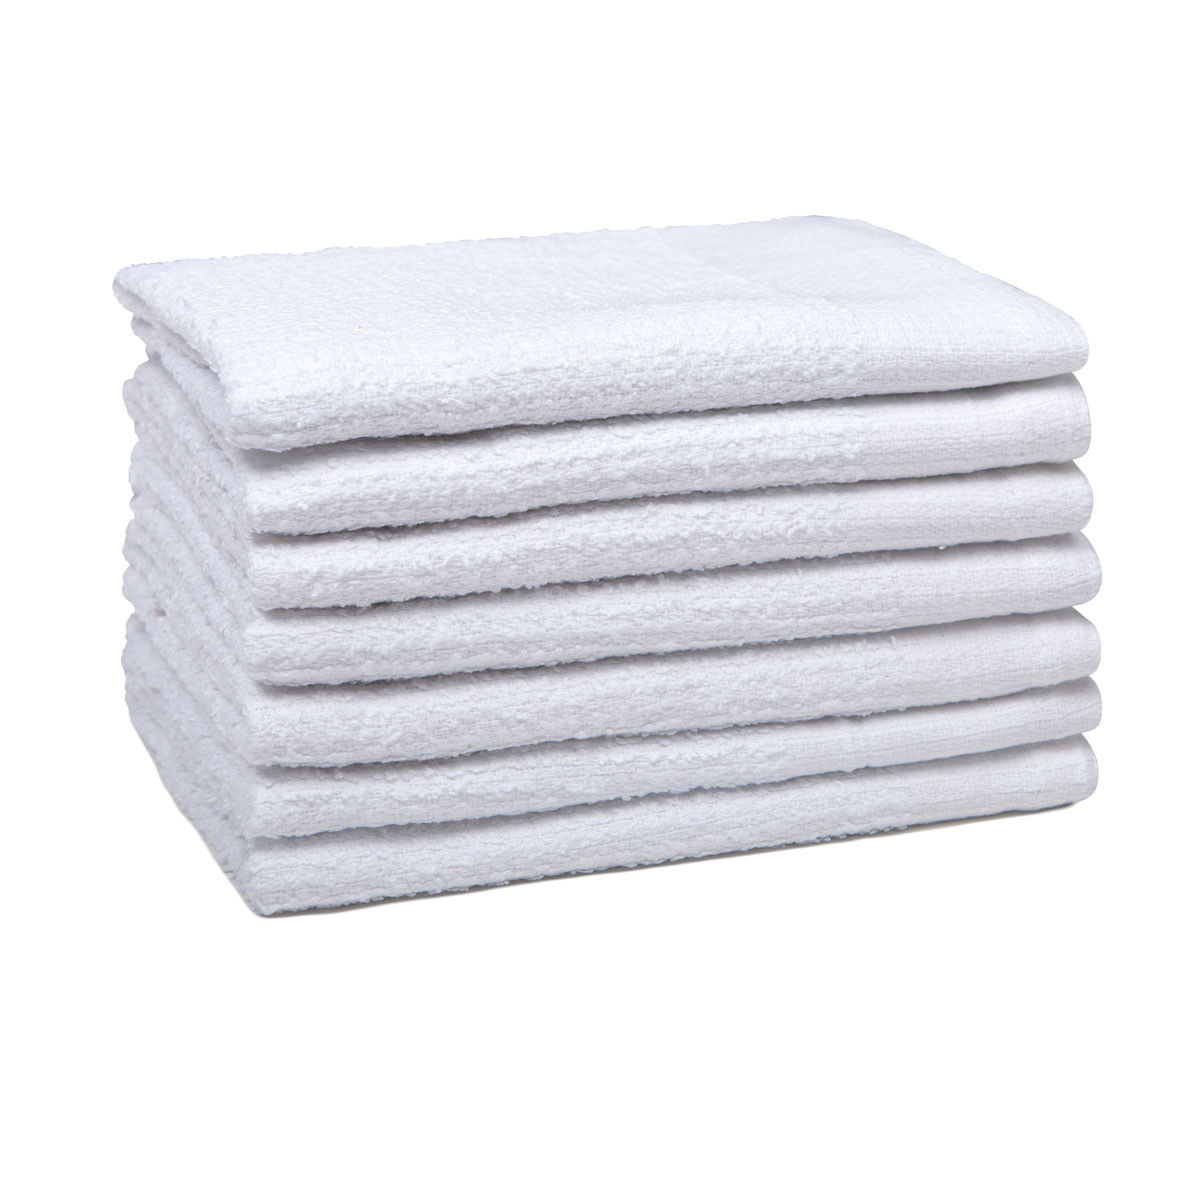 What is the quantity of bar towels in each bale of Wholesale Bar Mop Towels by Intralin?